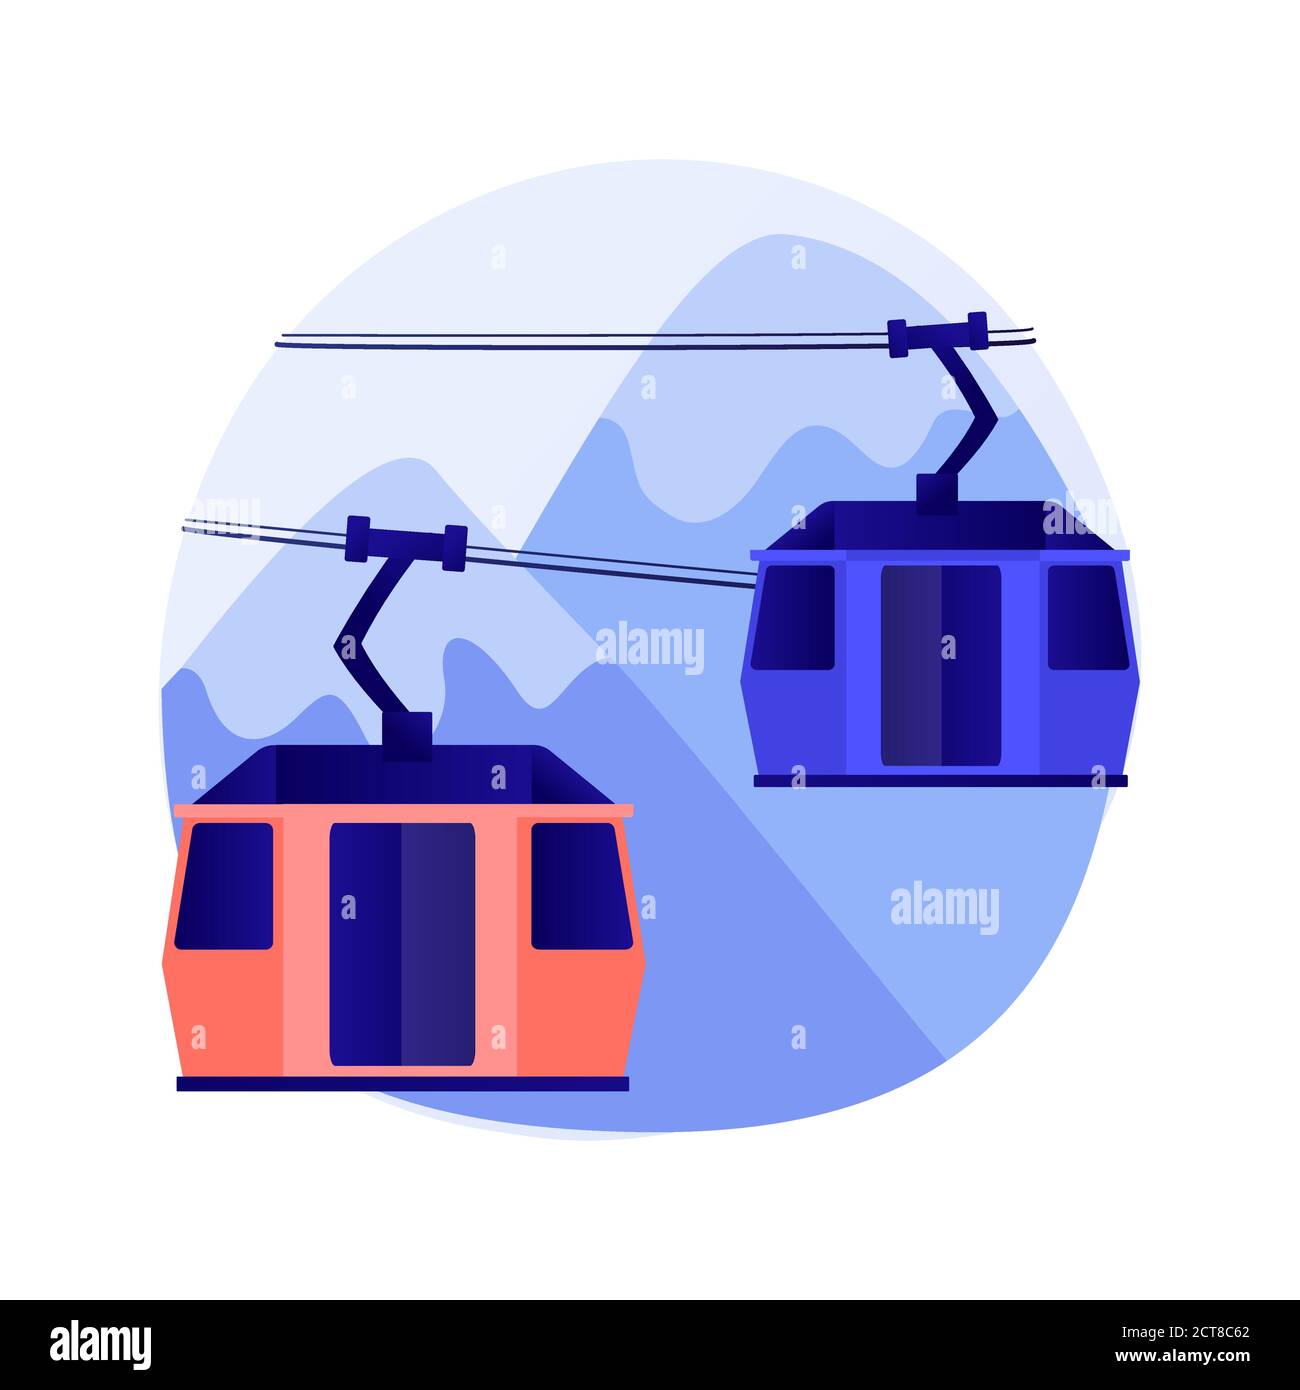 Cable transport abstract concept vector illustration. Stock Vector